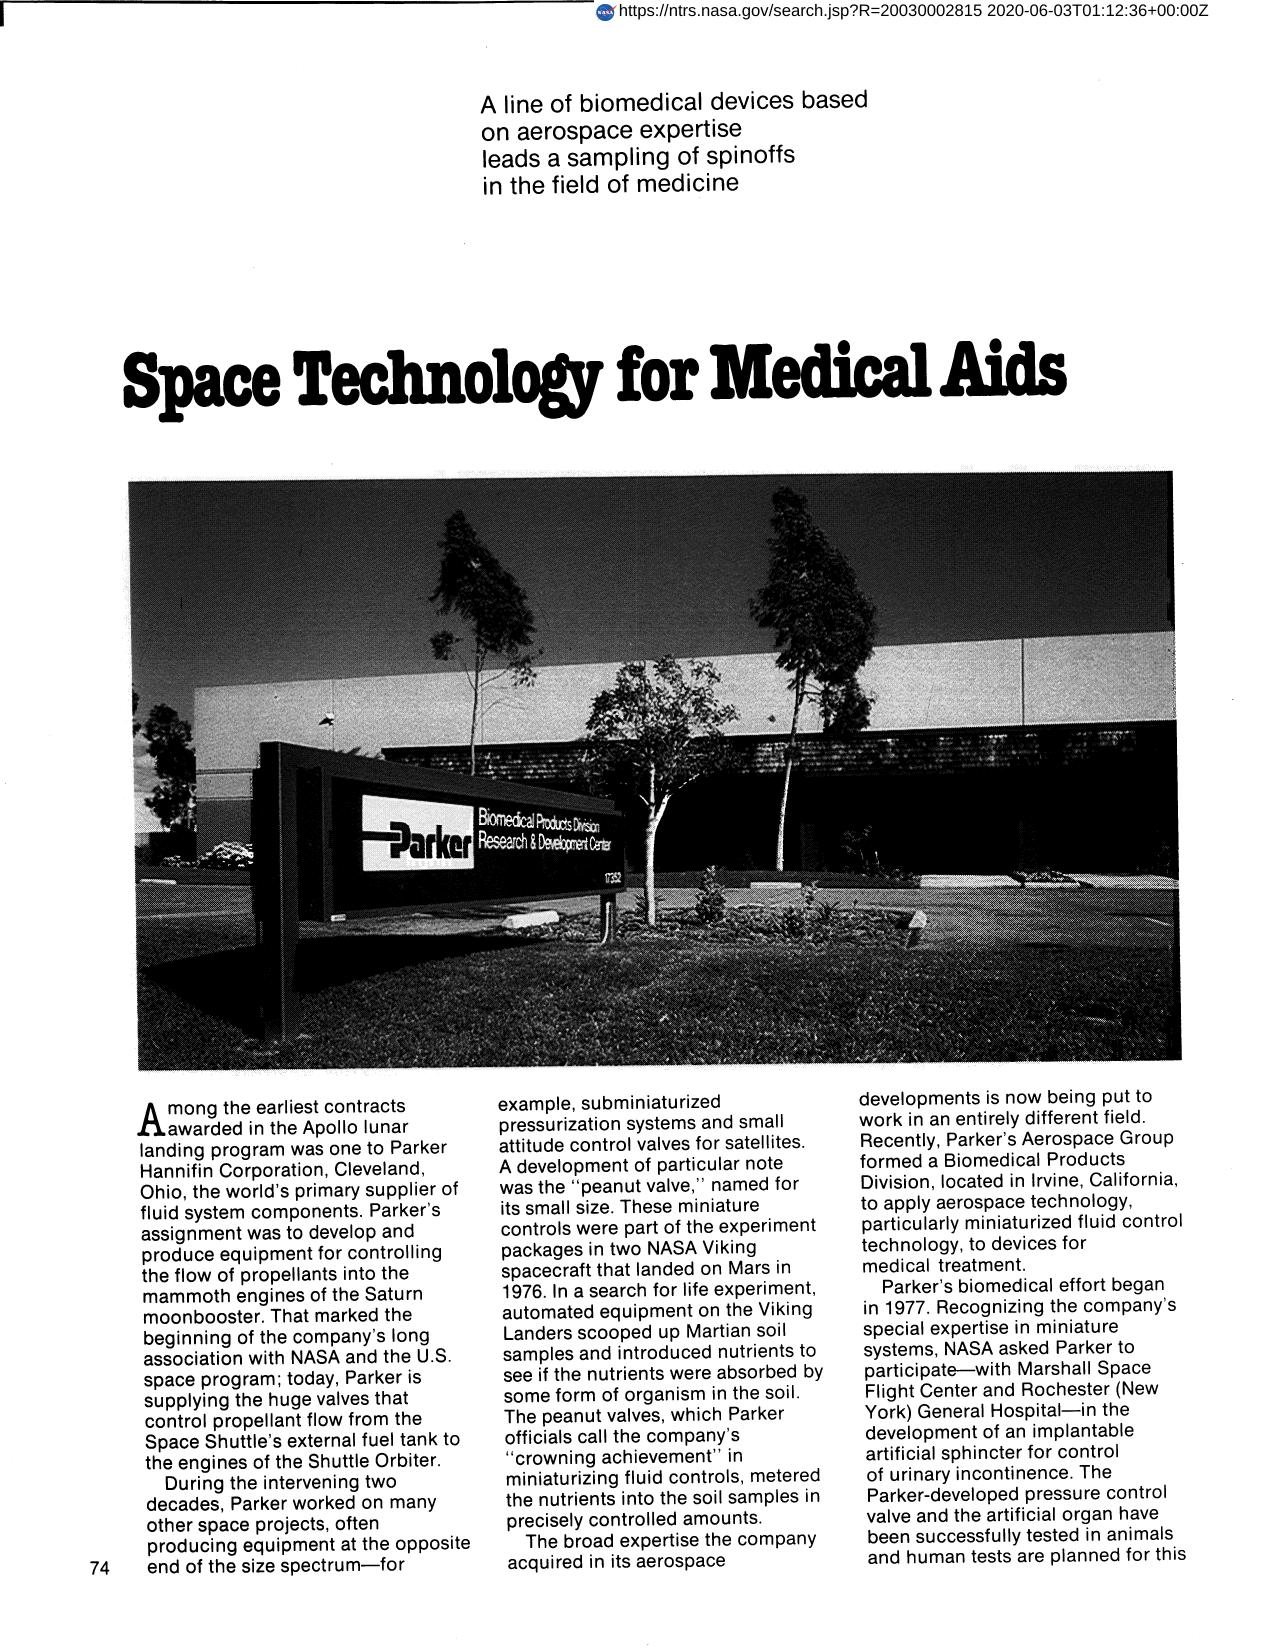 Space Technology for Medical Aids